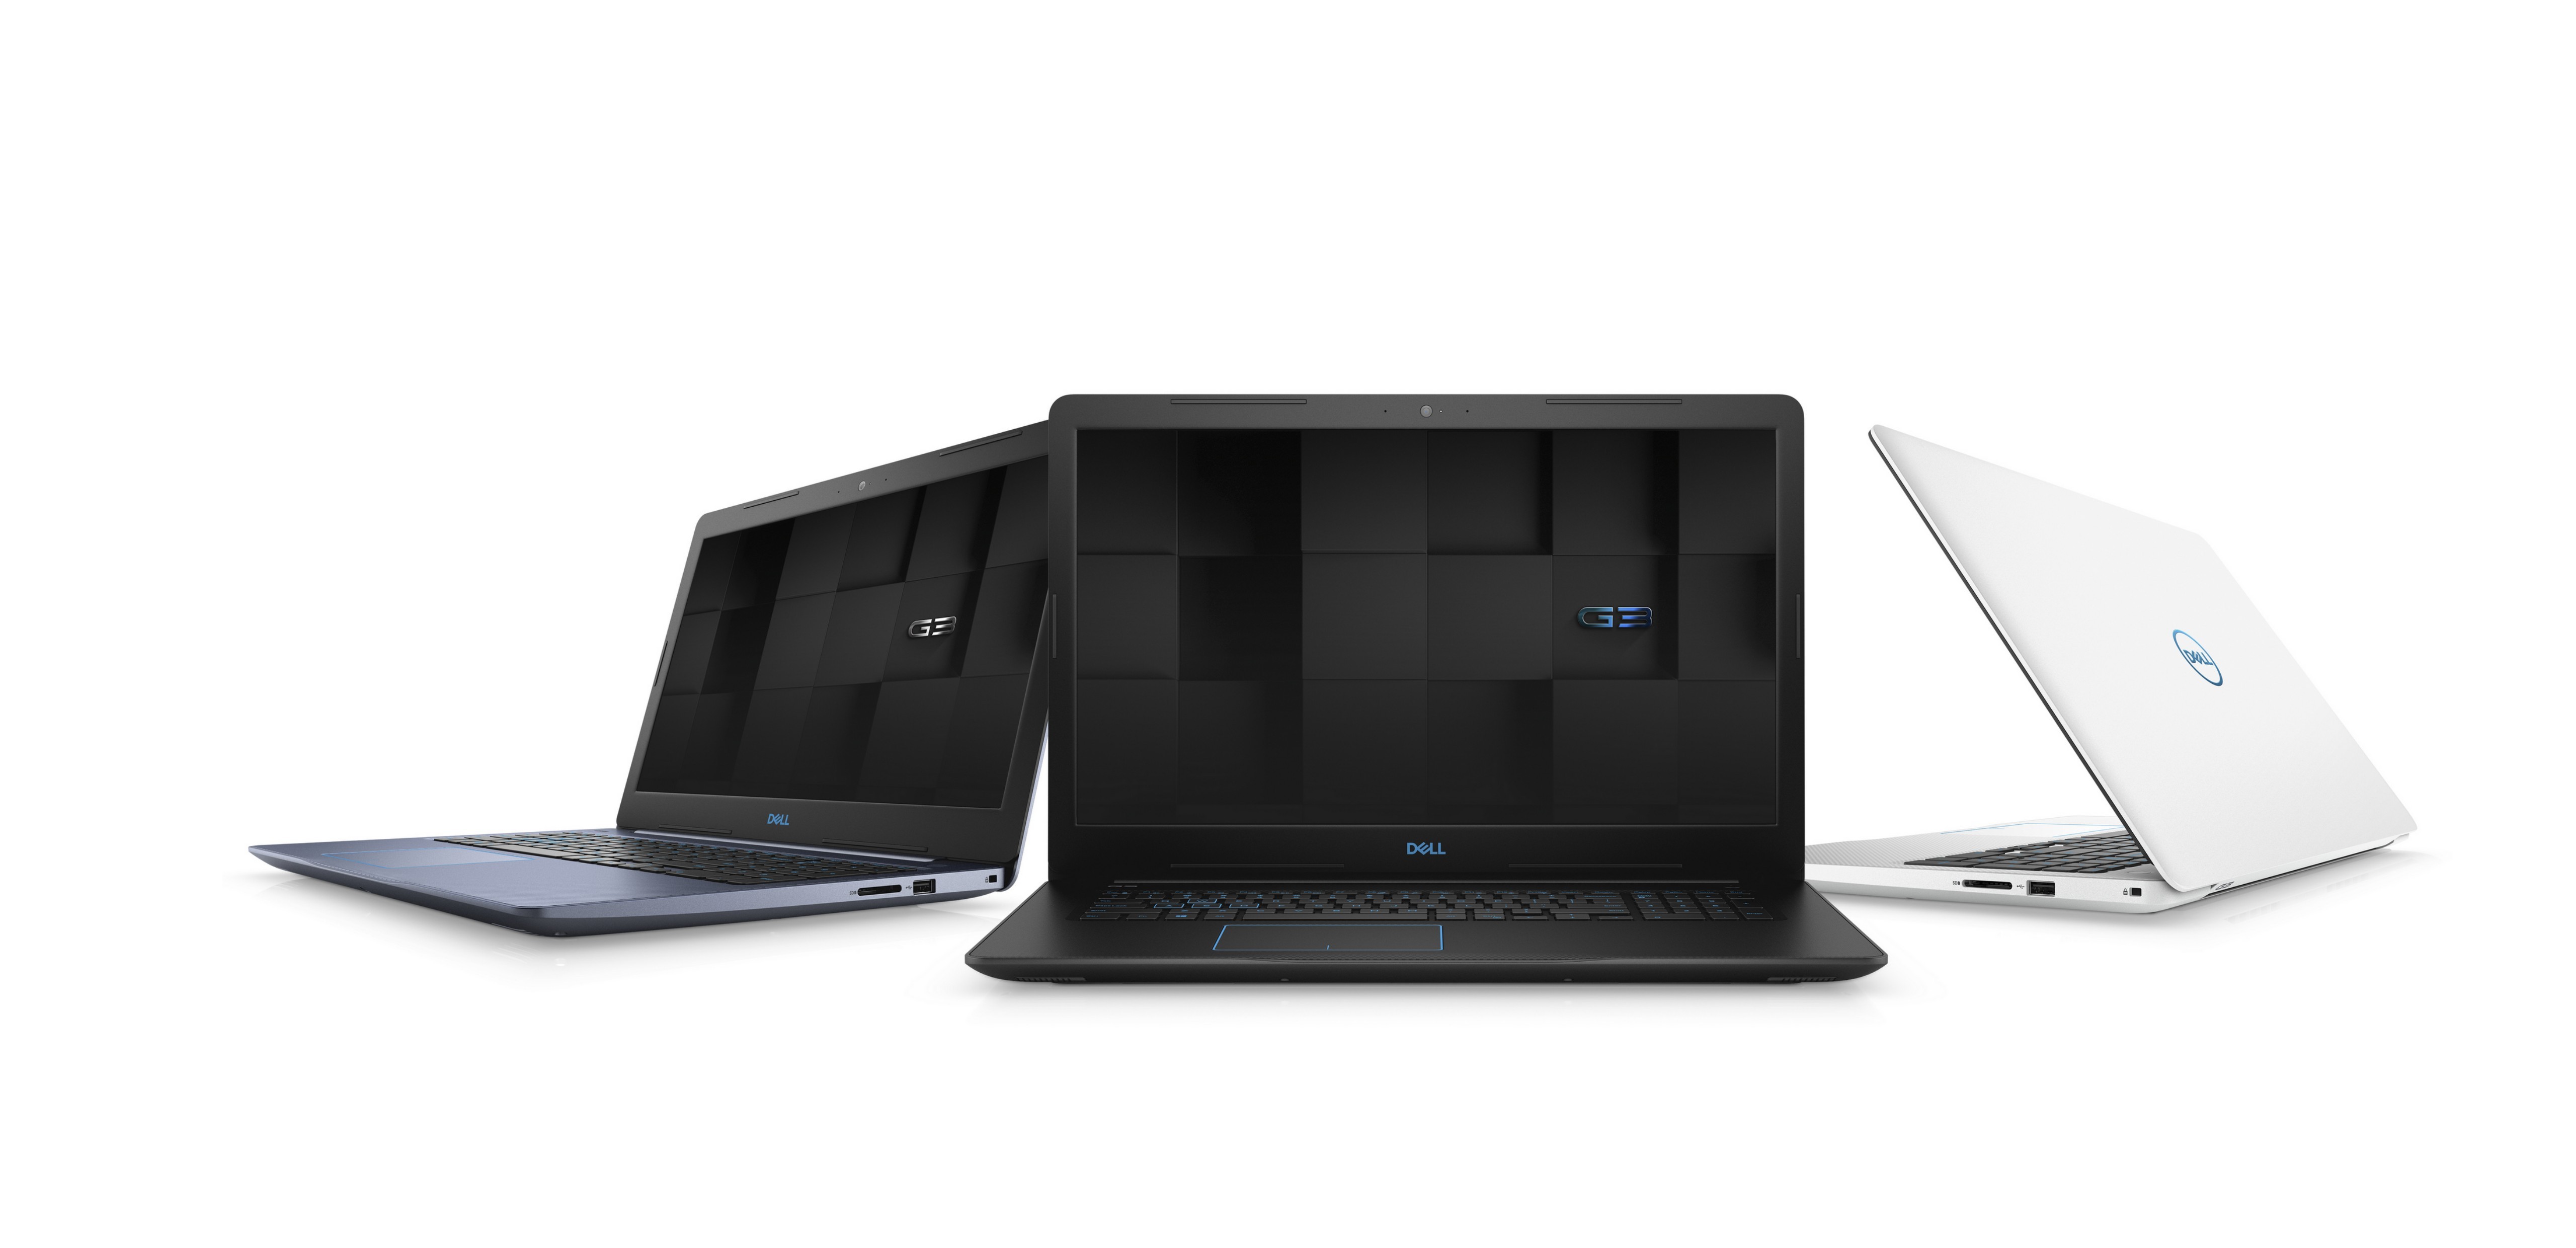 Three Dell devices in different colors